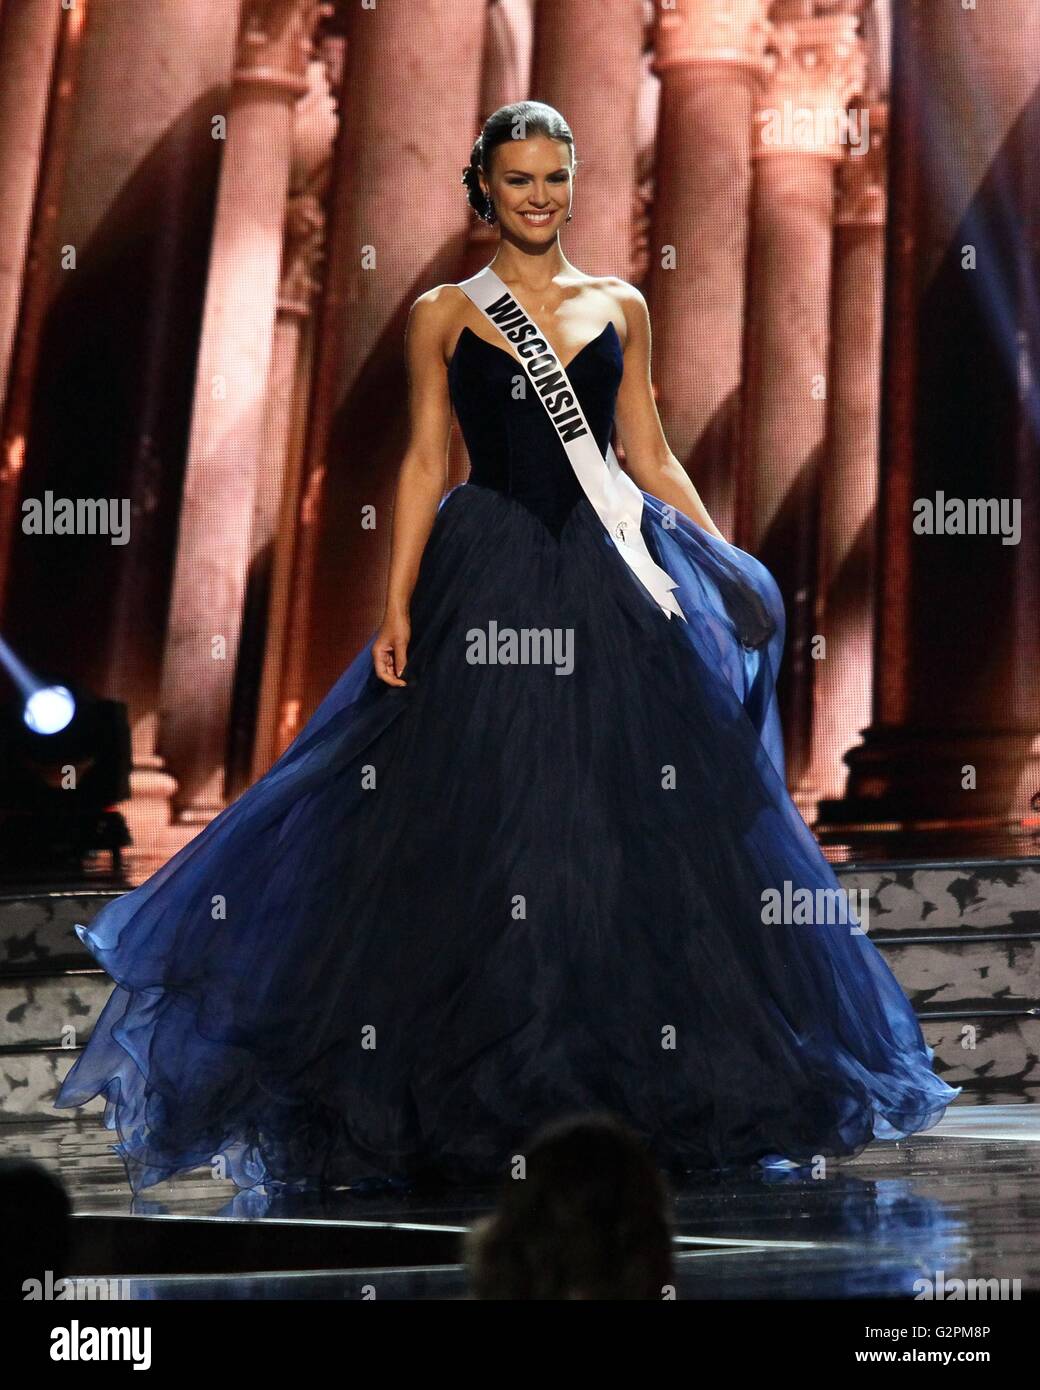 Las Vegas, NV, USA. 1st June, 2016. Miss Wisconsin USA, Kate Redeker in attendance for The 2016 MISS USA Preliminary Competition - Part 2, T-Mobile Arena, Las Vegas, NV June 1, 2016. Credit:  James Atoa/Everett Collection/Alamy Live News Stock Photo